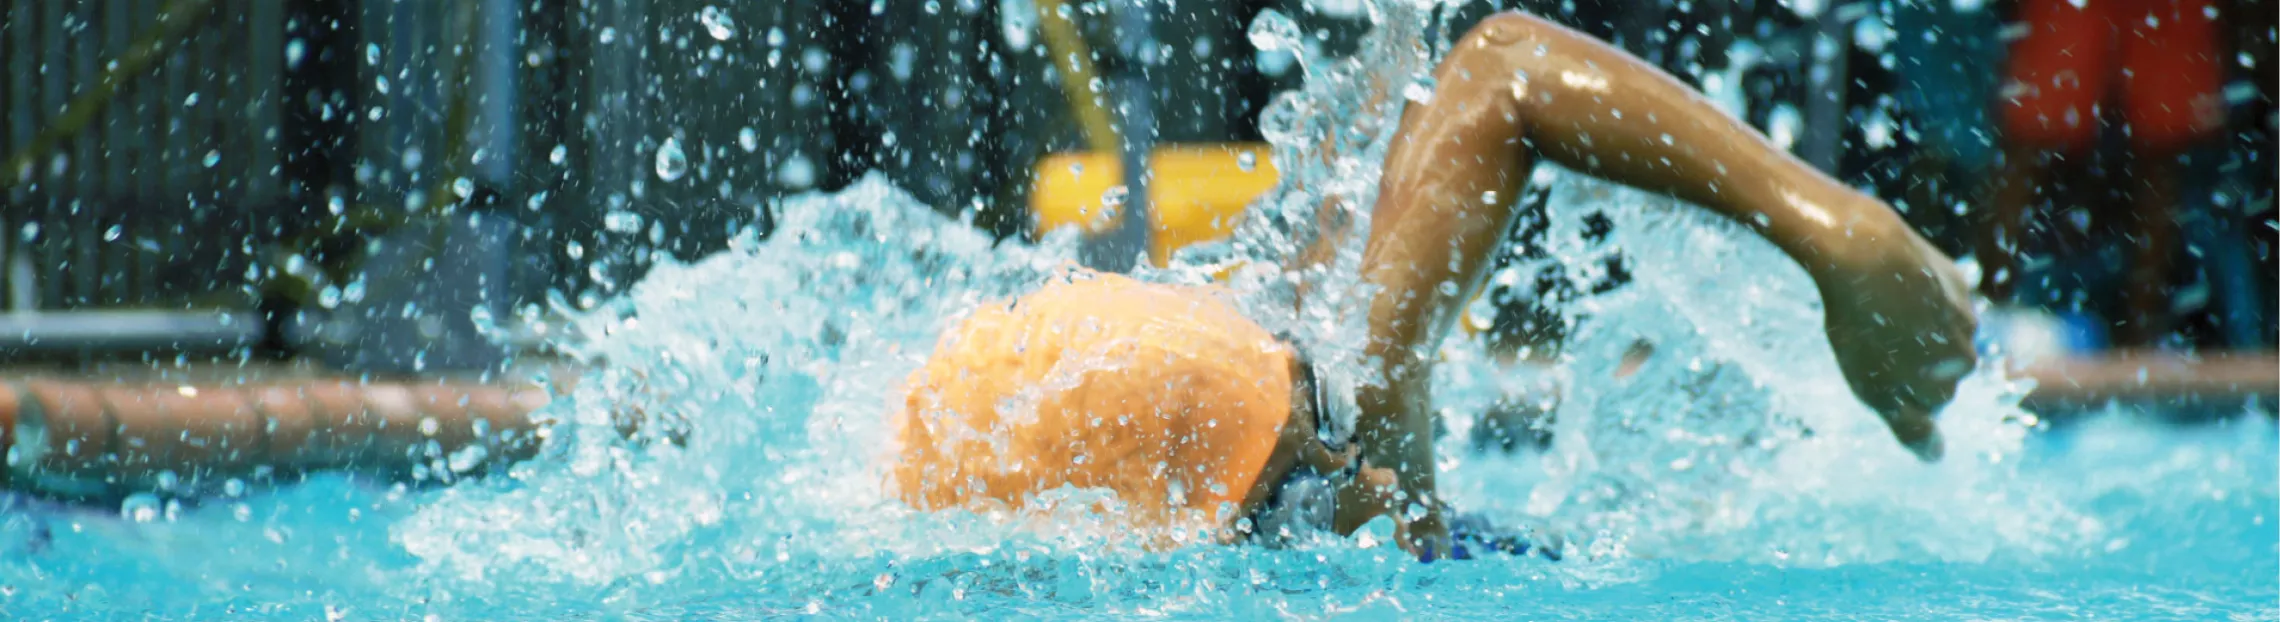 Person in a pool competitively swimming